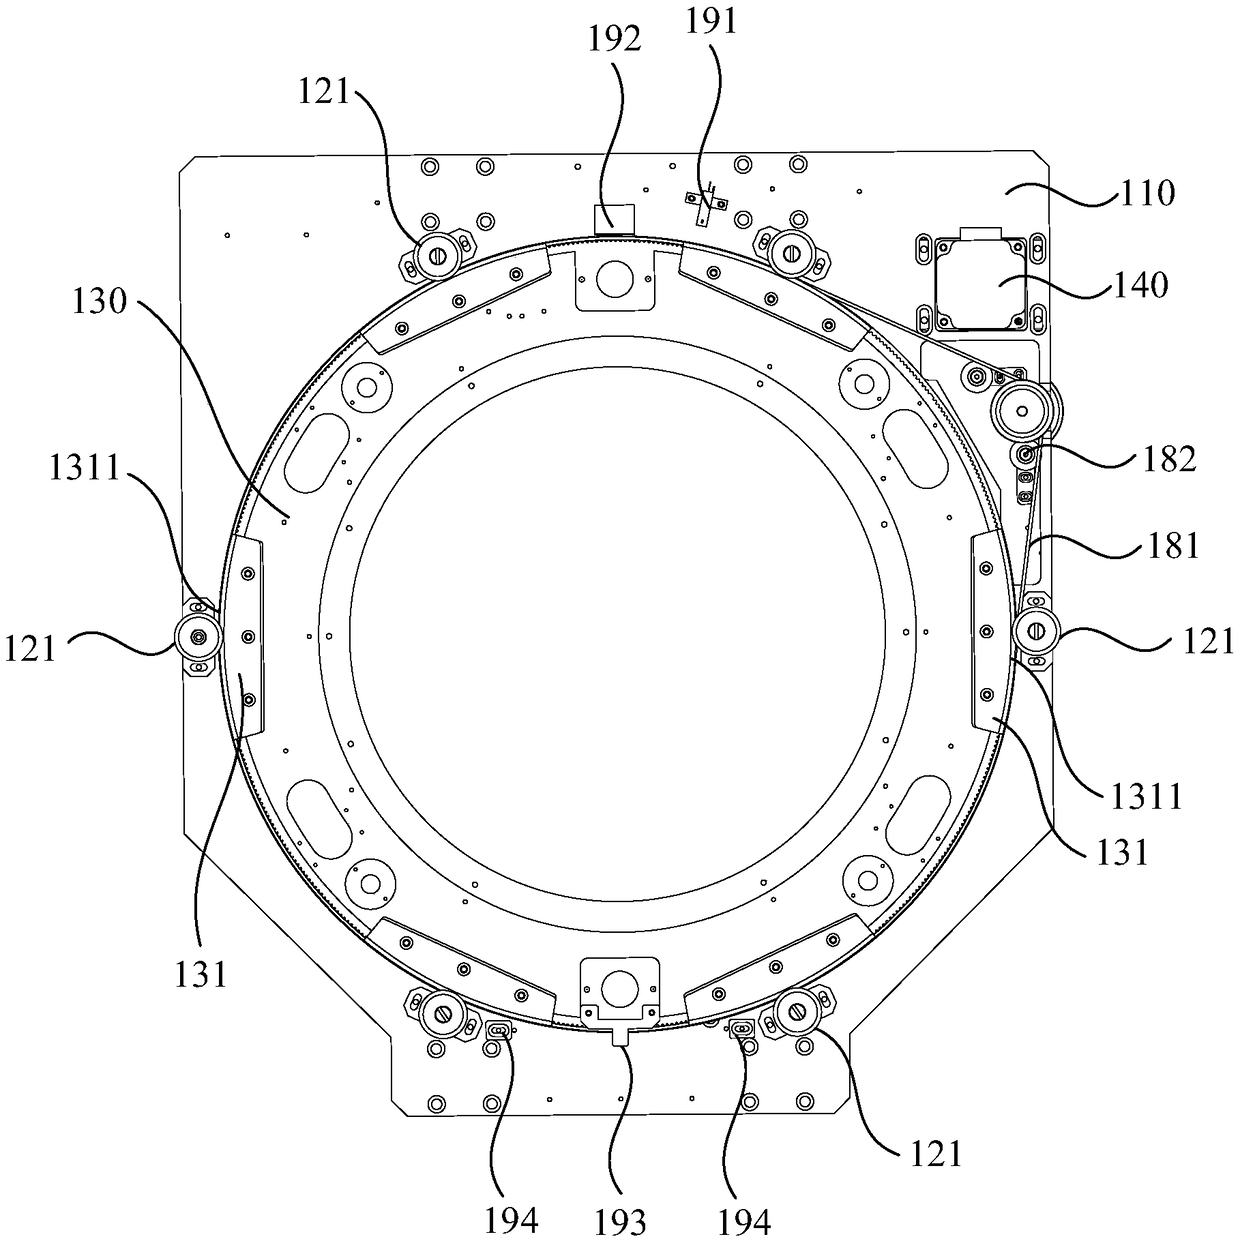 Packaging device and a tensioning and adjusting device of a wafer blue film thereof